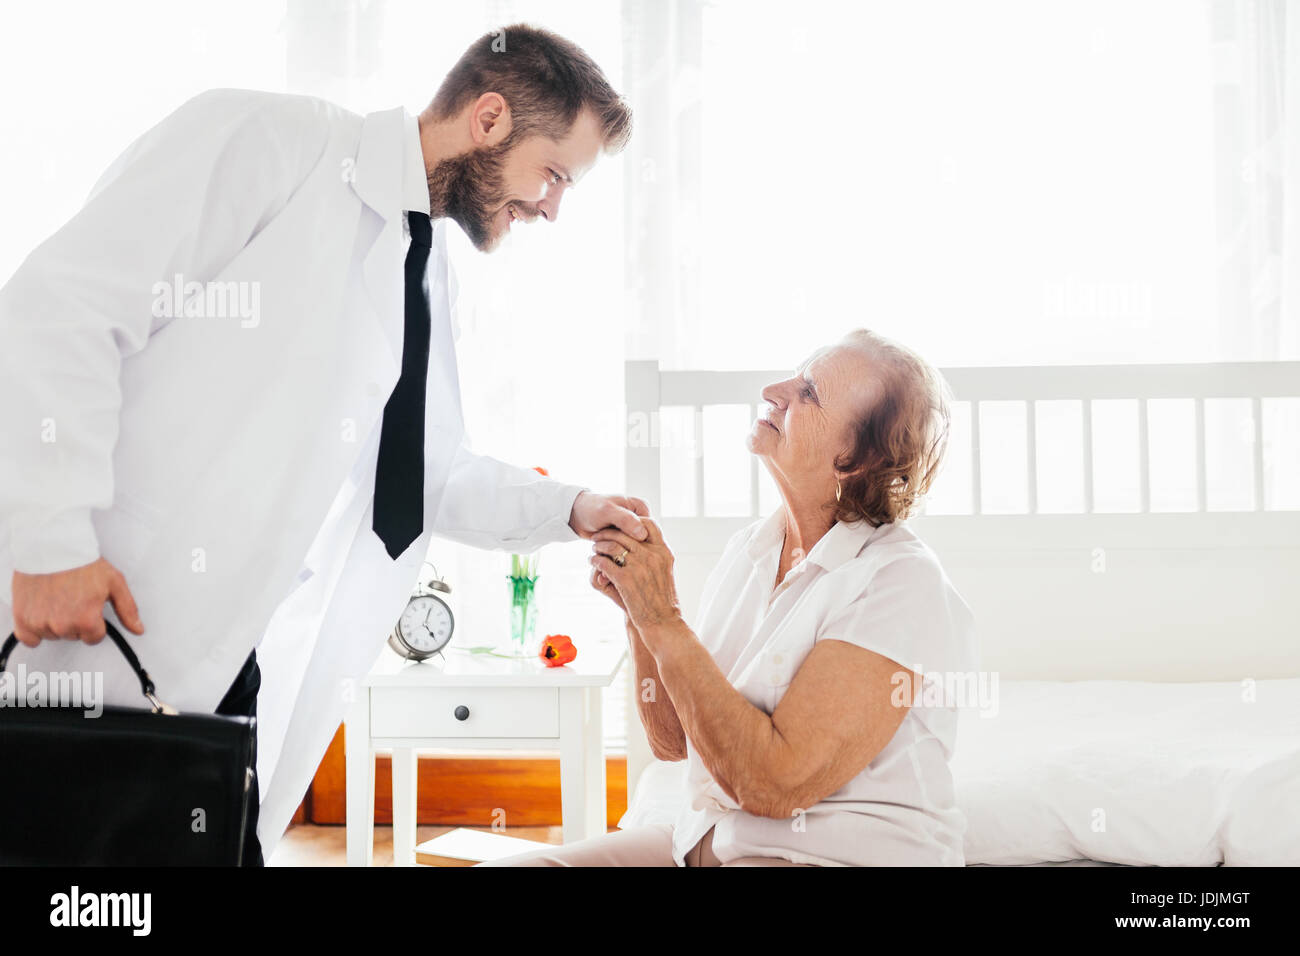 Providing care and support for elderly. Doctor visiting elderly patient at home. Stock Photo